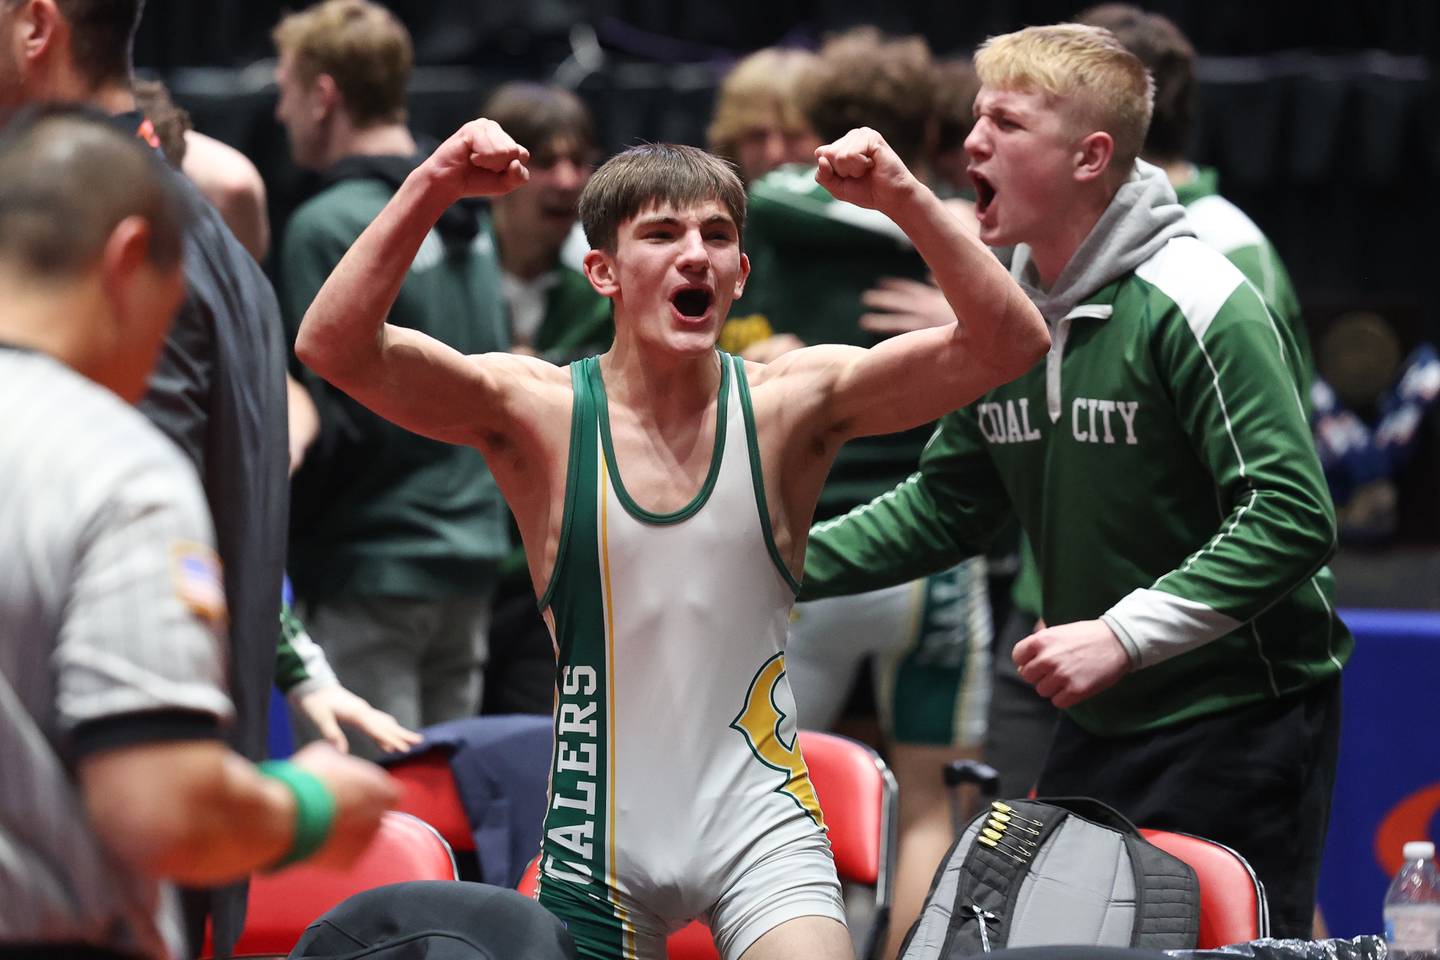 Coal City’s Brody Widlowski celebrates his team clinching win over Yorkville Christian’s Eli Foster in the 113-pound match for the Class 1A dual team championship on Saturday, Feb. 25, 2023, at Grossinger Motors Arena in Bloomington.